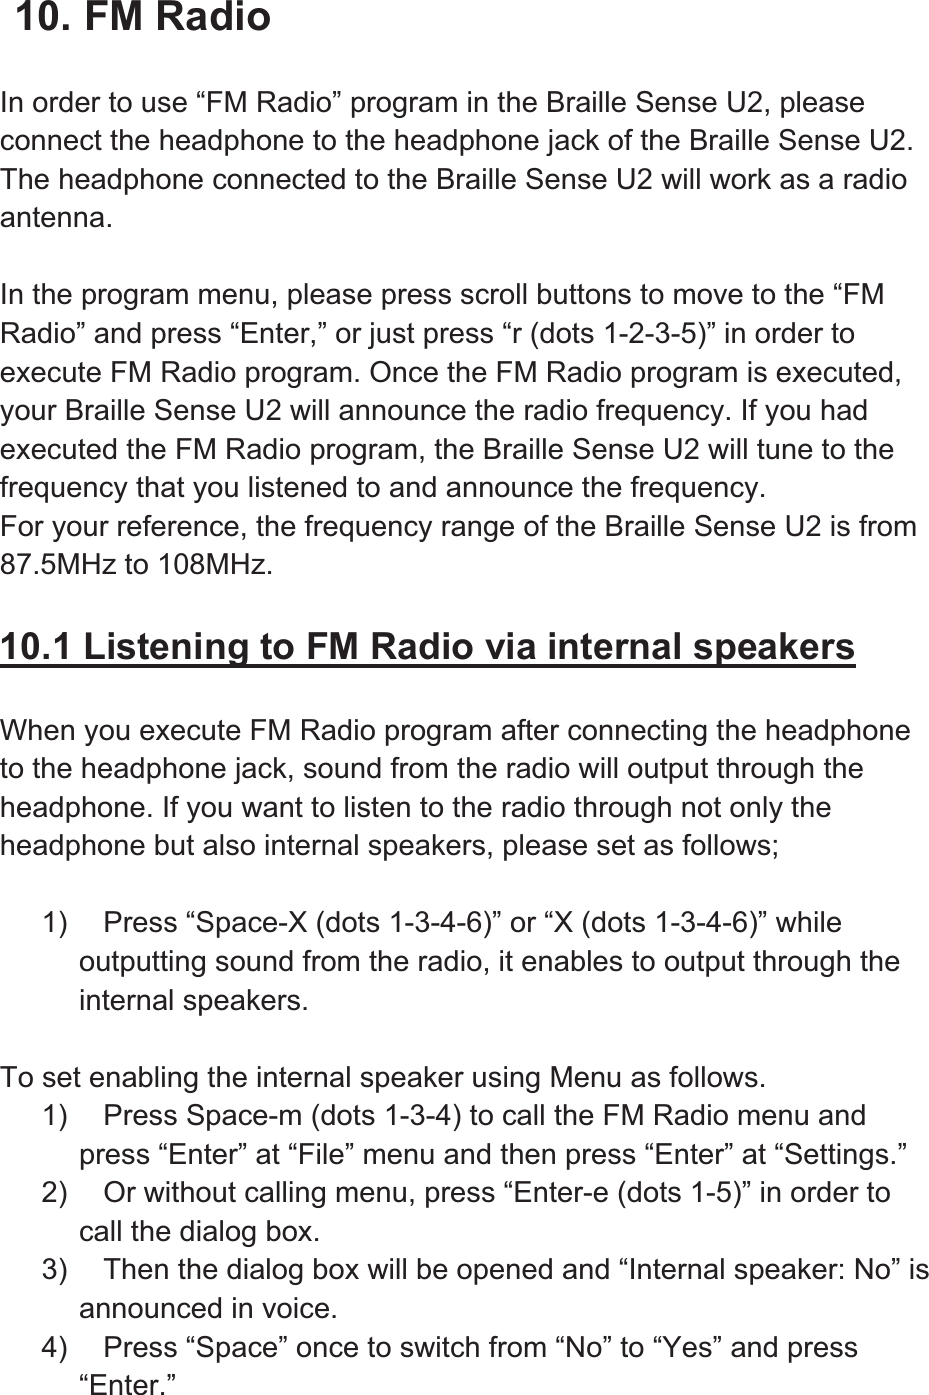 10. FM Radio In order to use “FM Radio” program in the Braille Sense U2, please connect the headphone to the headphone jack of the Braille Sense U2. The headphone connected to the Braille Sense U2 will work as a radio antenna.In the program menu, please press scroll buttons to move to the “FM Radio” and press “Enter,” or just press “r (dots 1-2-3-5)” in order to execute FM Radio program. Once the FM Radio program is executed, your Braille Sense U2 will announce the radio frequency. If you had executed the FM Radio program, the Braille Sense U2 will tune to the frequency that you listened to and announce the frequency.   For your reference, the frequency range of the Braille Sense U2 is from 87.5MHz to 108MHz. 10.1 Listening to FM Radio via internal speakersWhen you execute FM Radio program after connecting the headphone to the headphone jack, sound from the radio will output through the headphone. If you want to listen to the radio through not only the headphone but also internal speakers, please set as follows; 1)  Press “Space-X (dots 1-3-4-6)” or “X (dots 1-3-4-6)” while outputting sound from the radio, it enables to output through the internal speakers.   To set enabling the internal speaker using Menu as follows. 1)  Press Space-m (dots 1-3-4) to call the FM Radio menu and press “Enter” at “File” menu and then press “Enter” at “Settings.” 2)  Or without calling menu, press “Enter-e (dots 1-5)” in order to call the dialog box. 3)  Then the dialog box will be opened and “Internal speaker: No” is announced in voice. 4)  Press “Space” once to switch from “No” to “Yes” and press “Enter.”